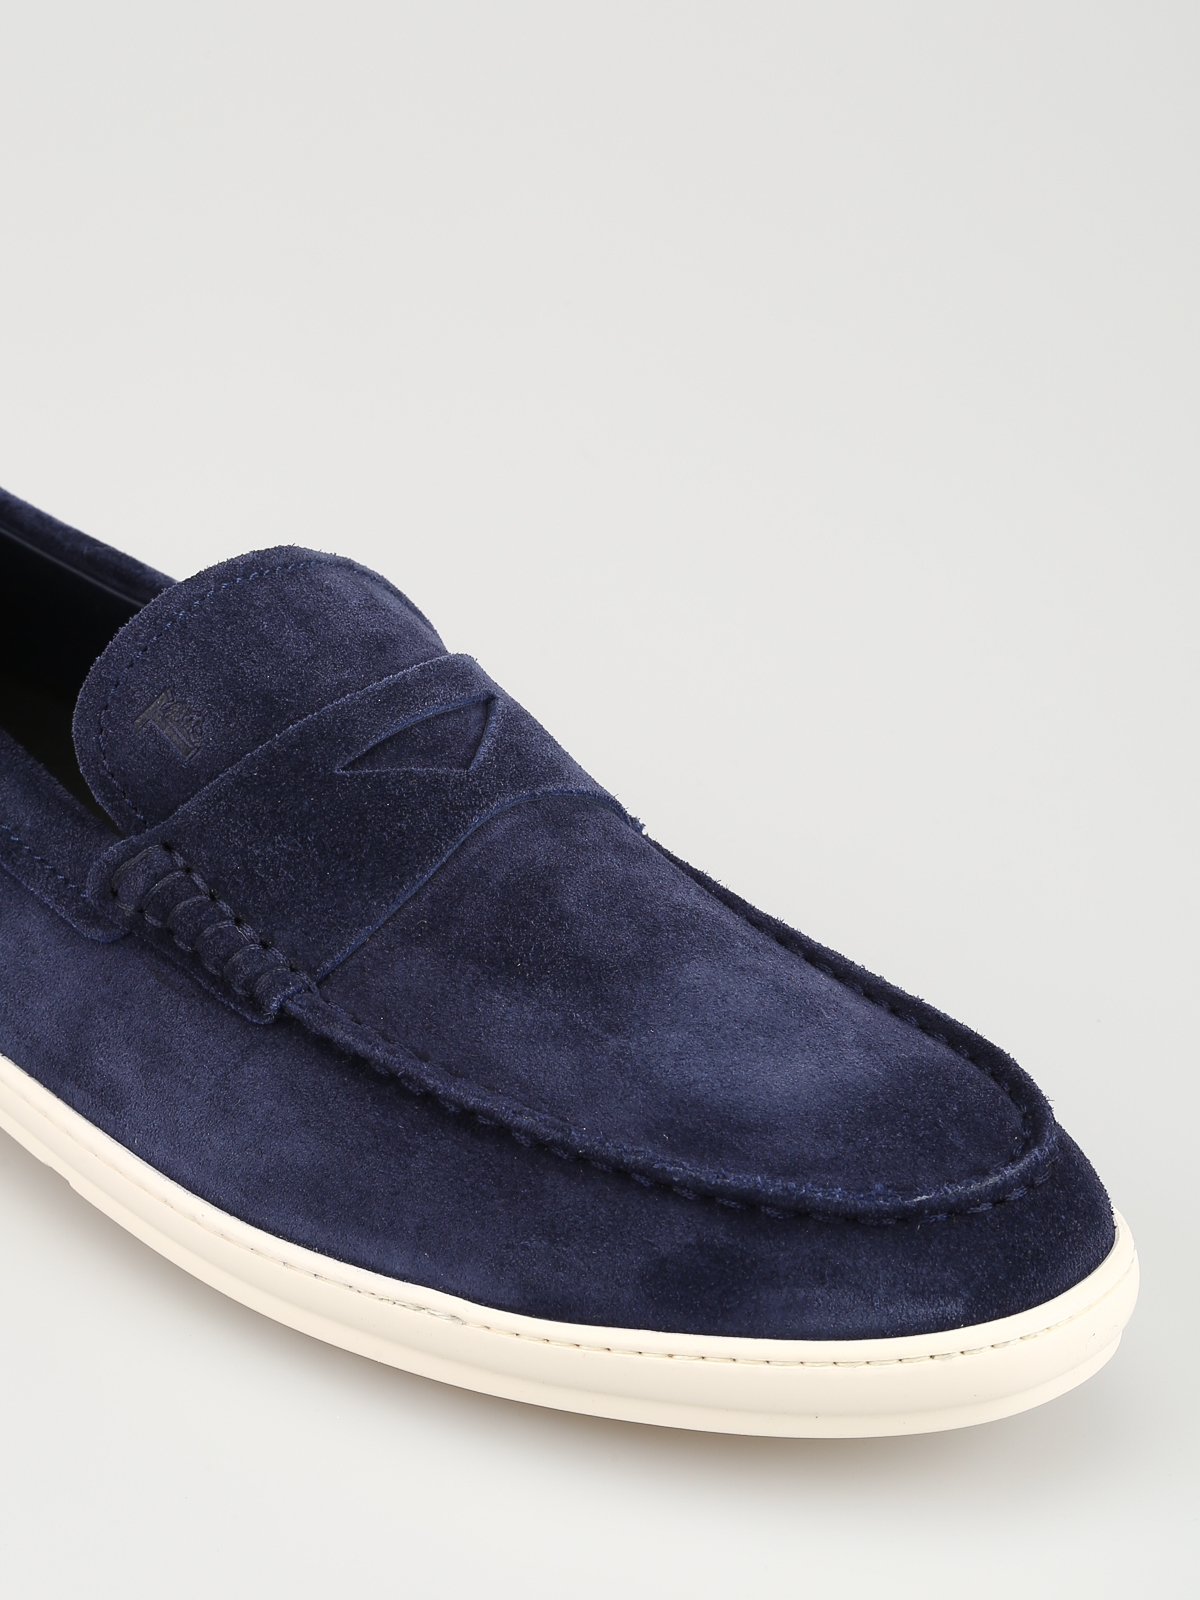 tods suede loafer